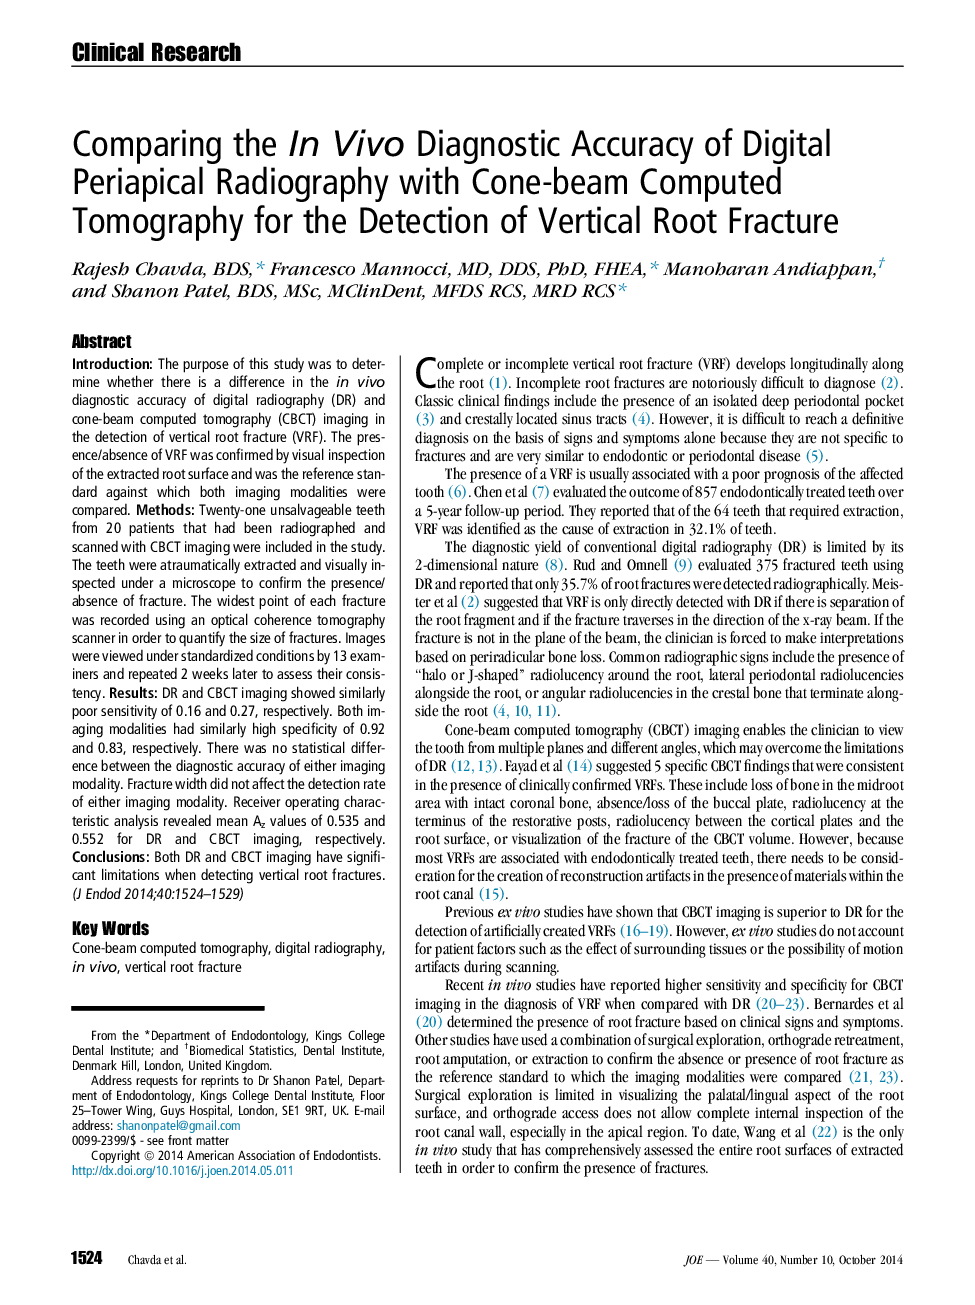 Comparing the In Vivo Diagnostic Accuracy of Digital Periapical Radiography with Cone-beam Computed Tomography for the Detection of Vertical Root Fracture